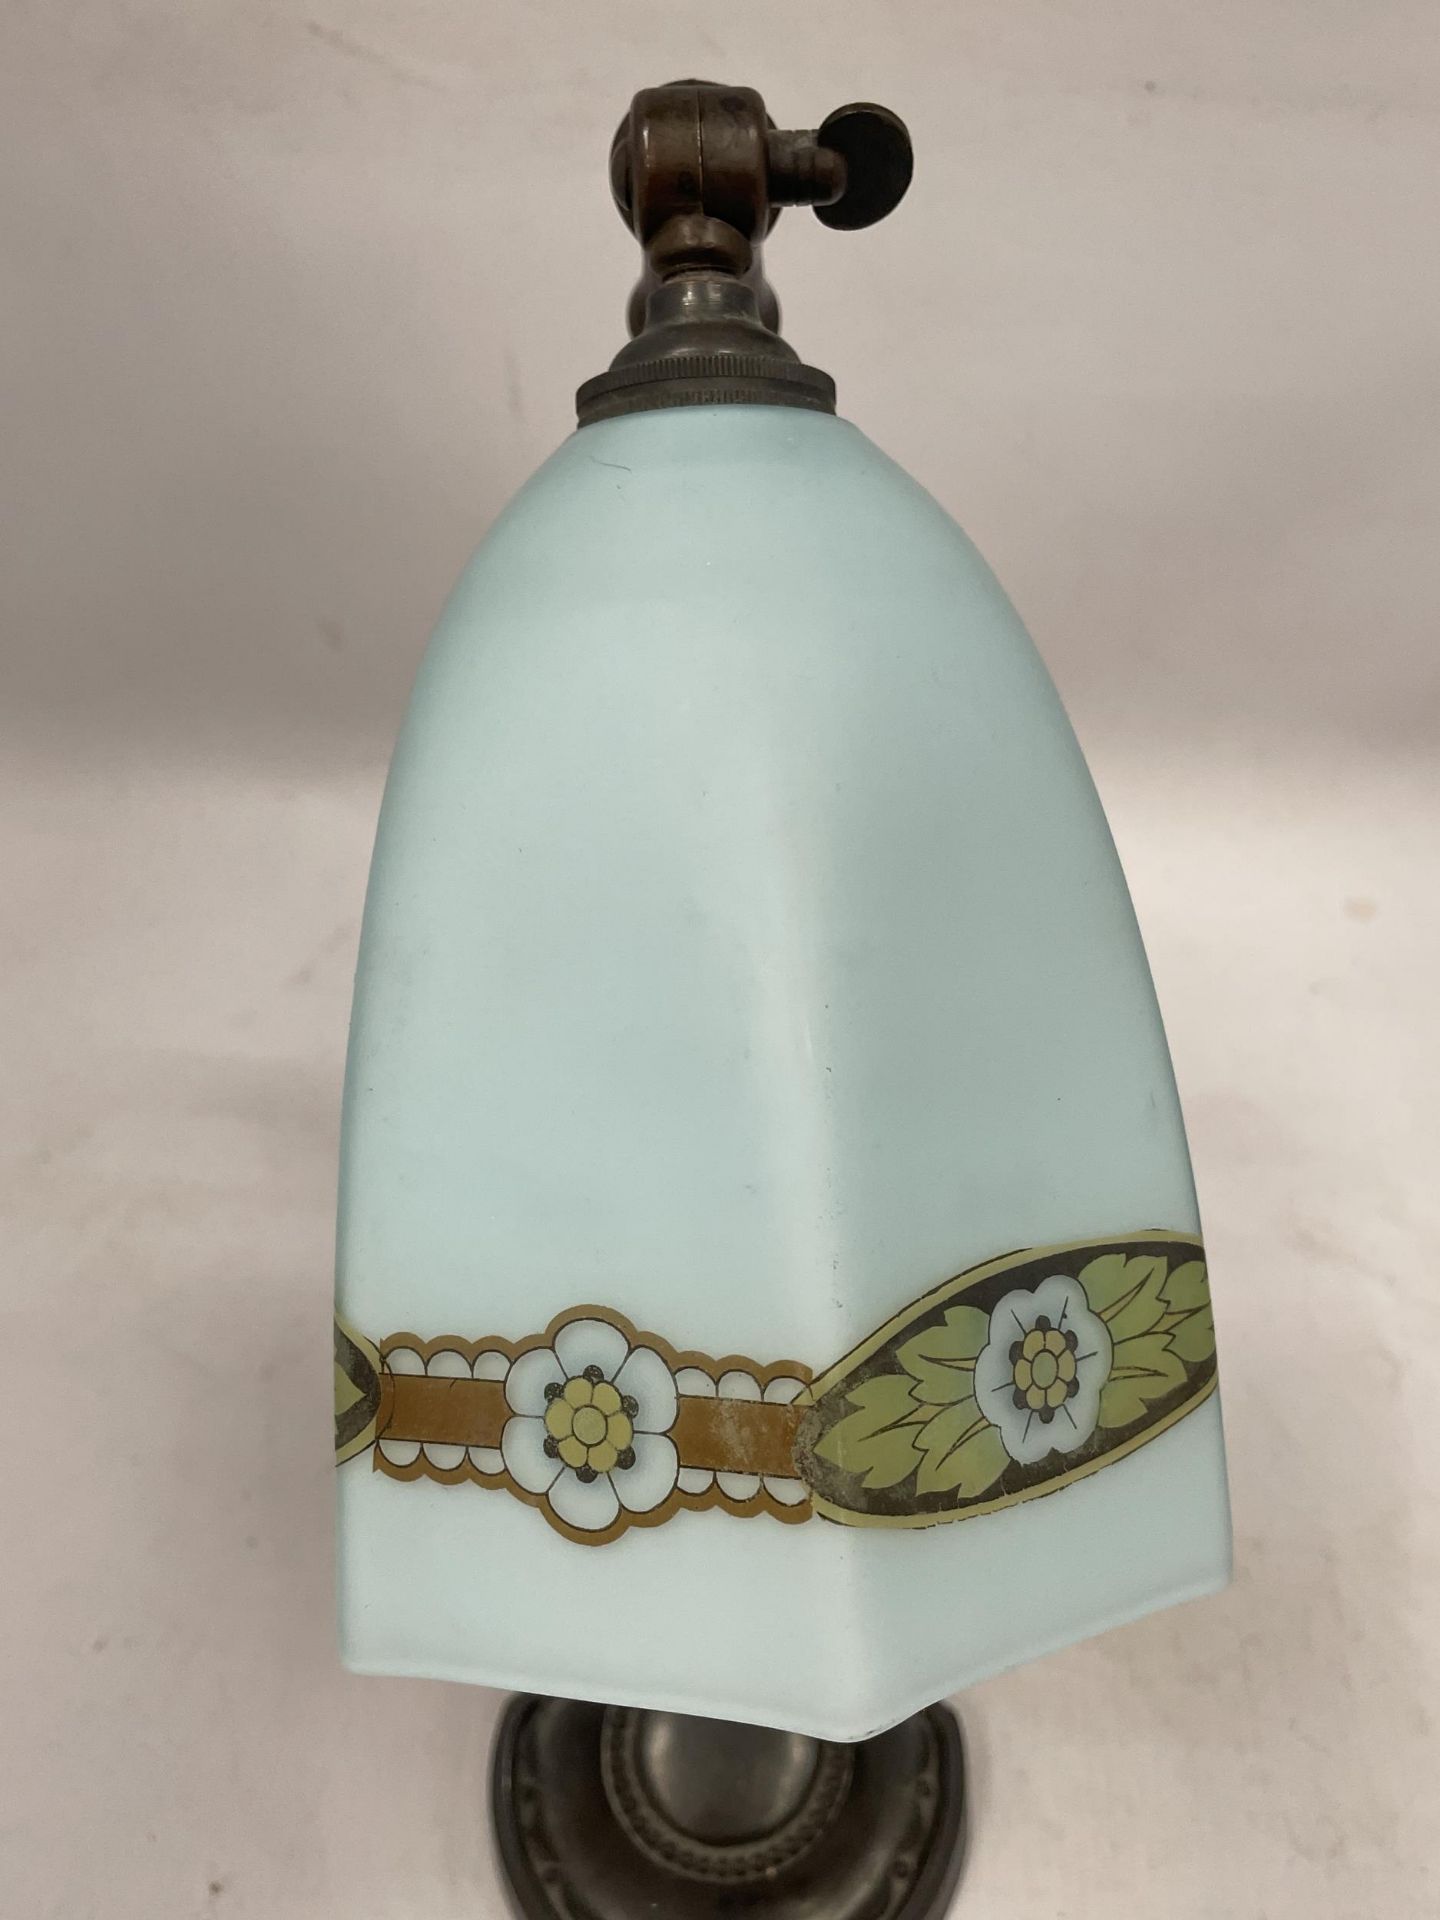 AN ART NOUVEAU METAL TABLE LAMP WITH FROSTED GLASS SHADE - Image 3 of 3